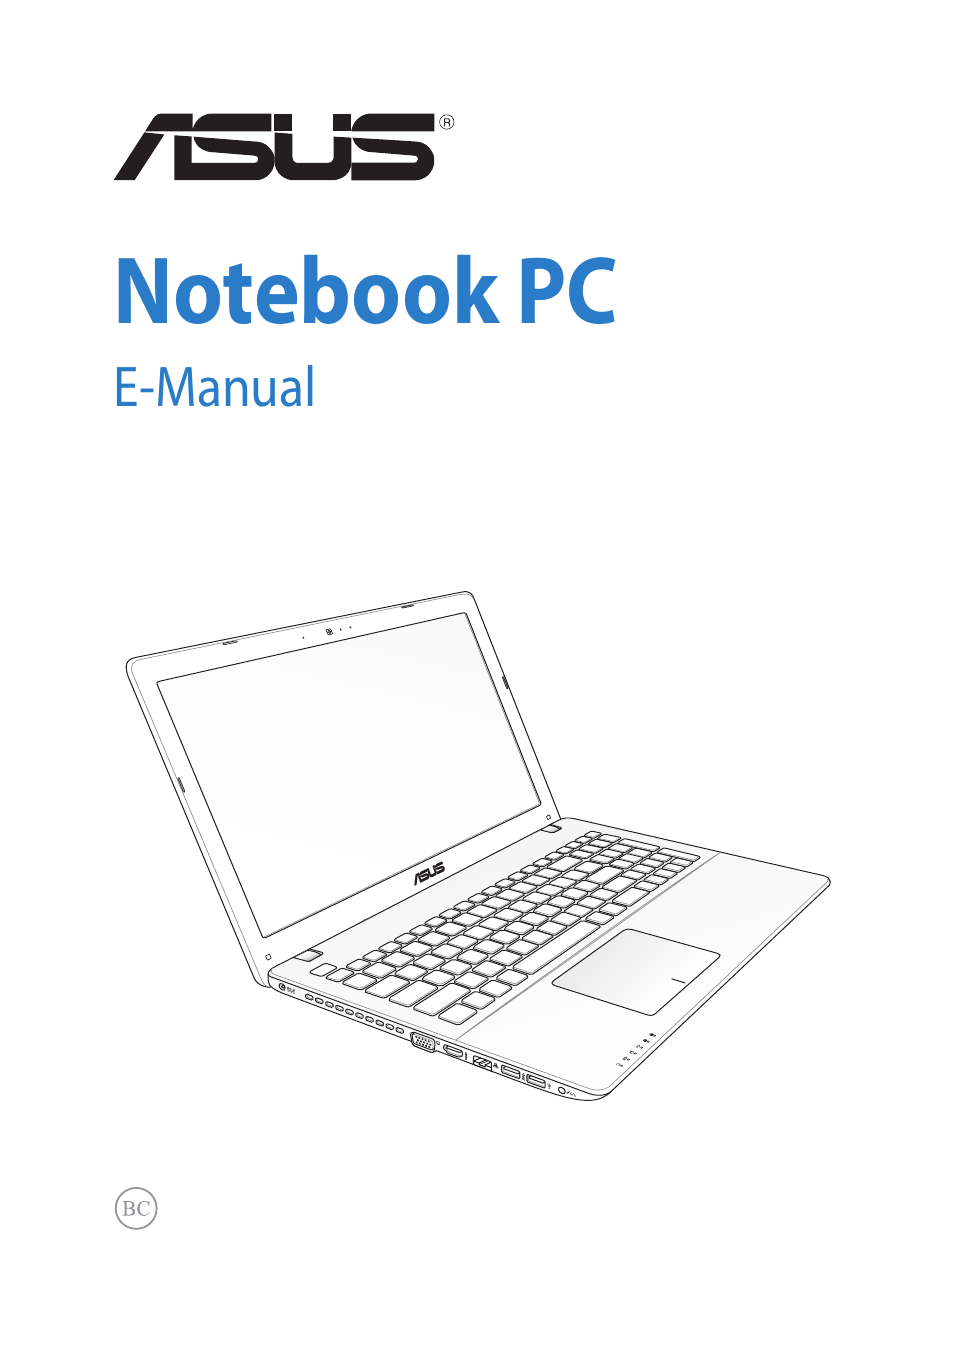 Asus Notebook PC (E-Manual) User Manual | 130 pages